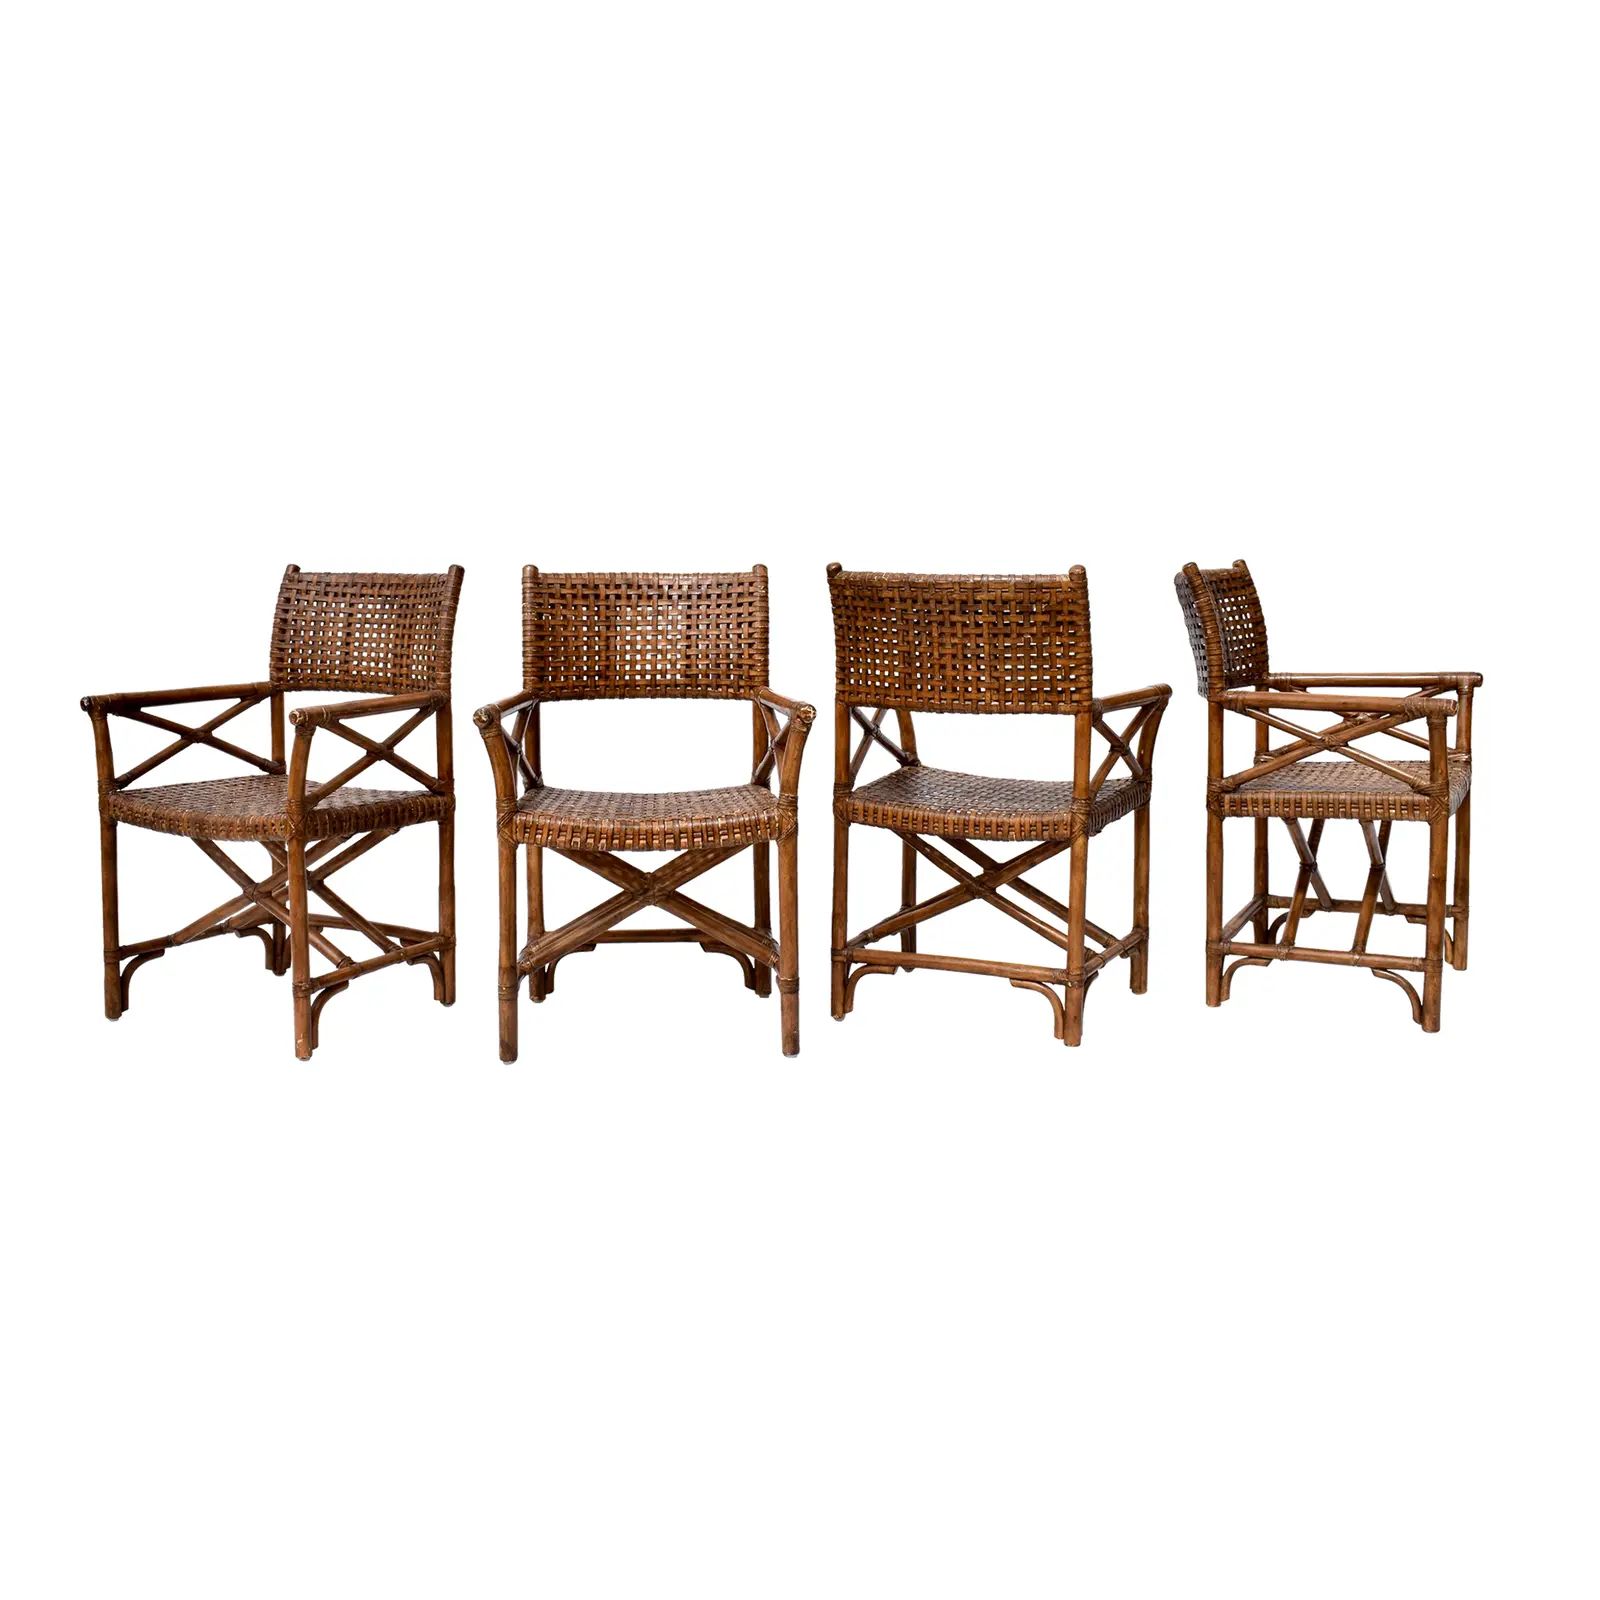 McGuire Style Laced Leather Rawhide Rattan Dining Chairs | Chairish